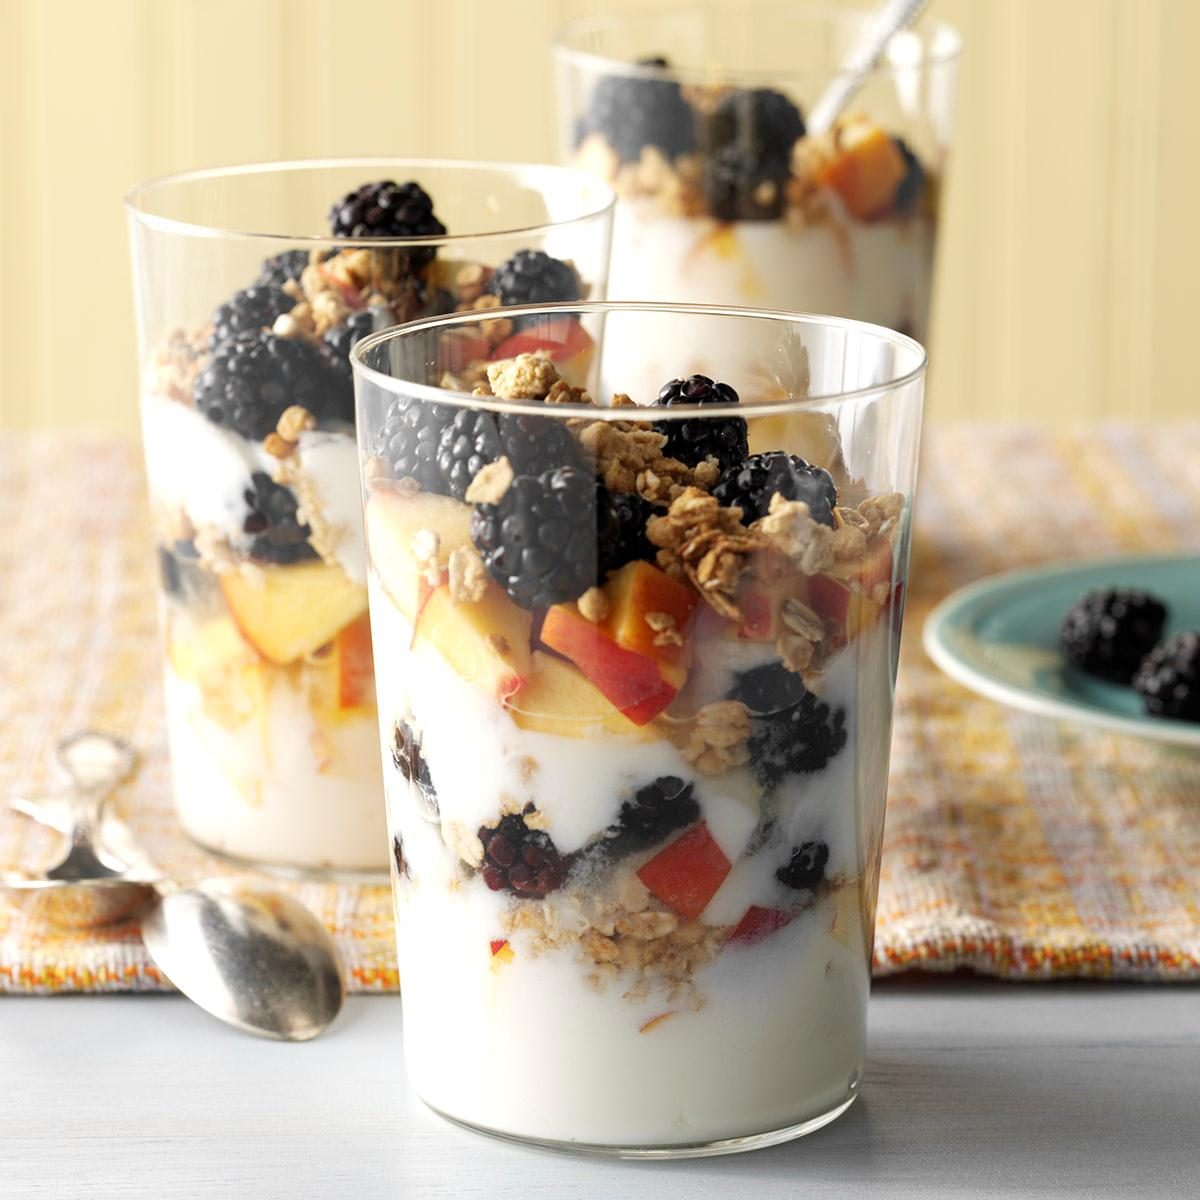 Day 2 Breakfast: Rise and Shine Parfait